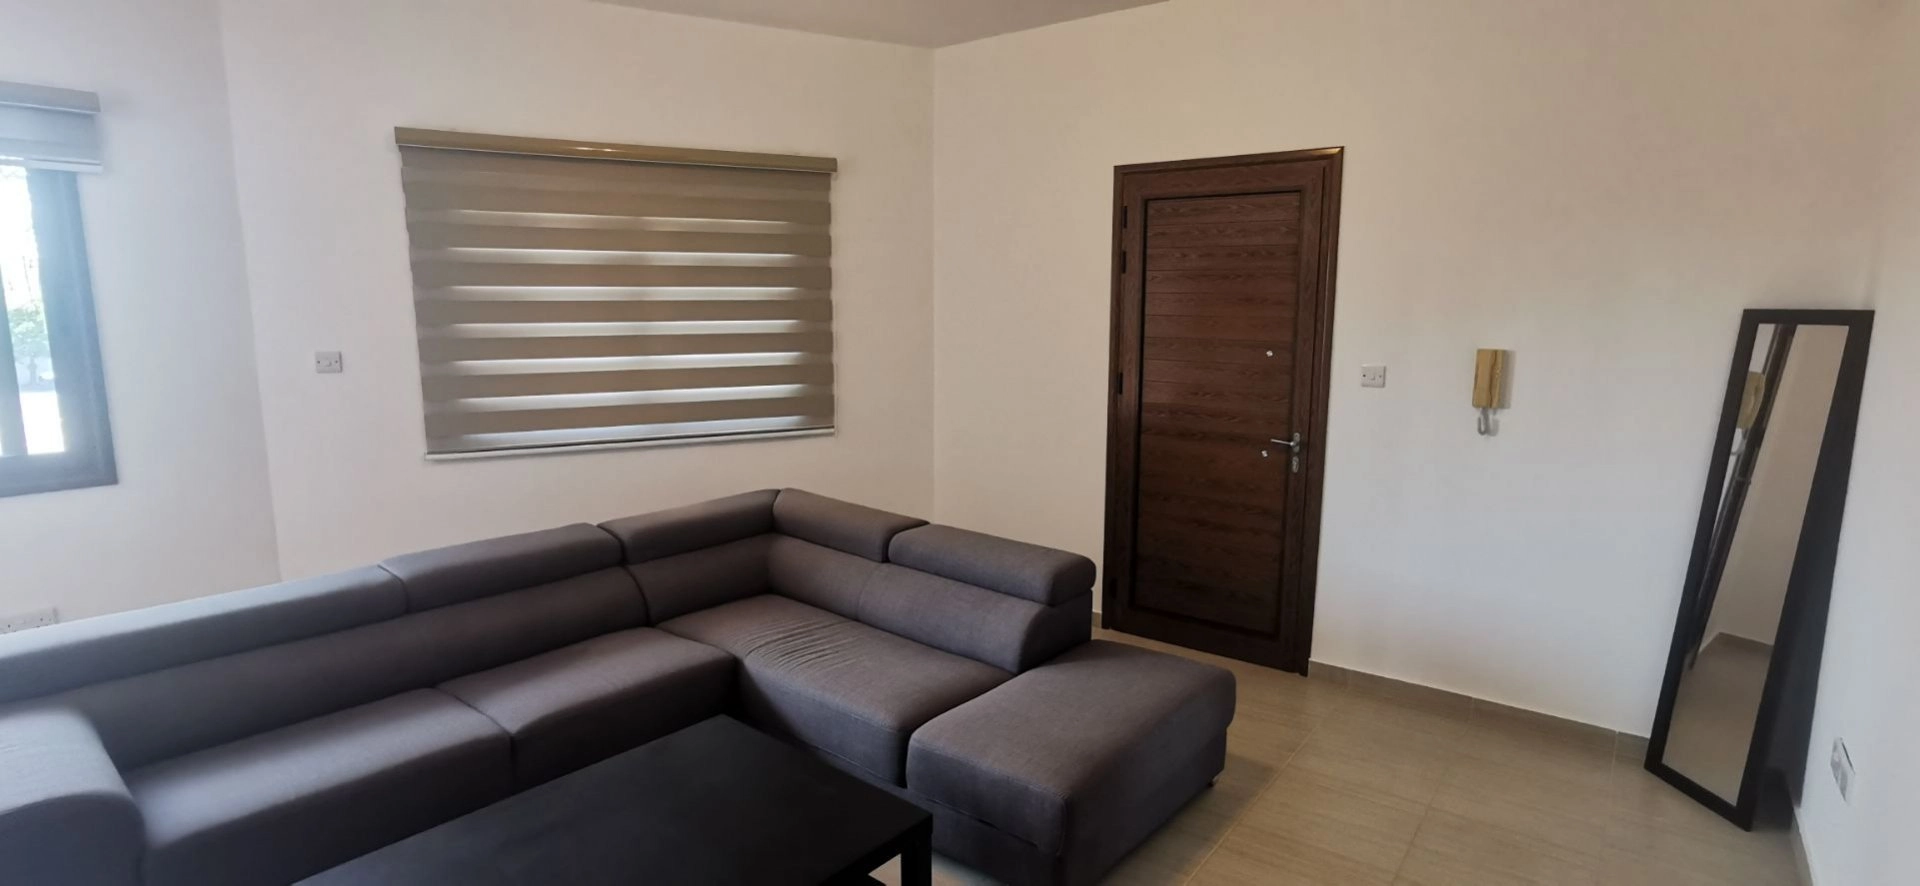 3 Bedroom Apartment for Rent in Kolossi, Limassol District